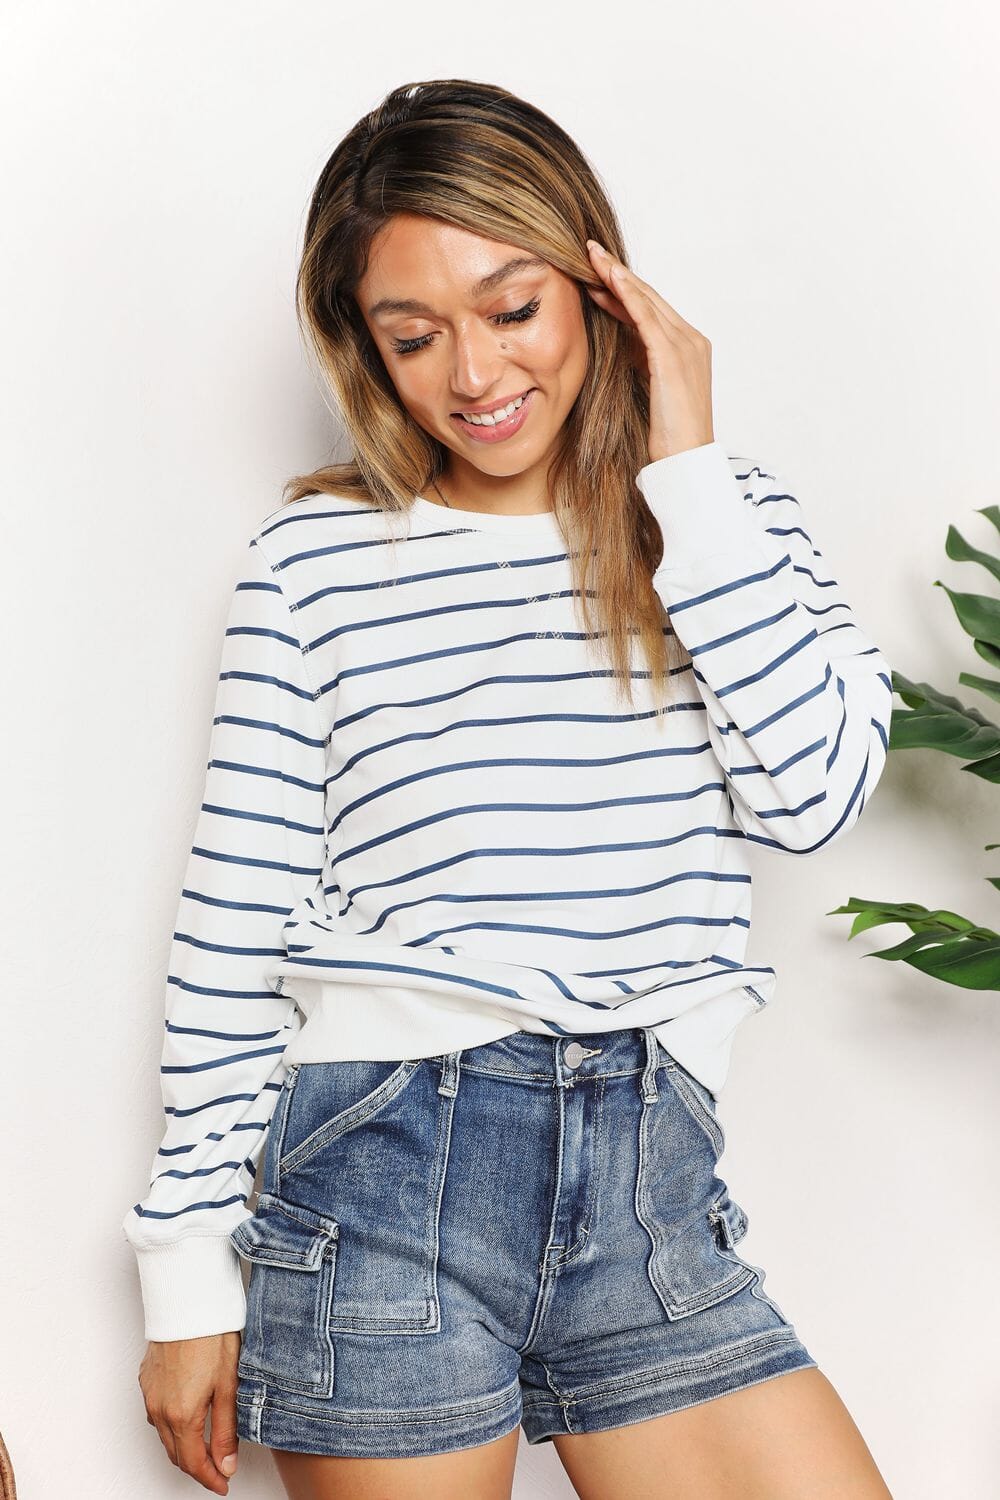 Double Take Striped Round Neck Long Sleeve Round Neck Top Shirts & Tops jehouze 